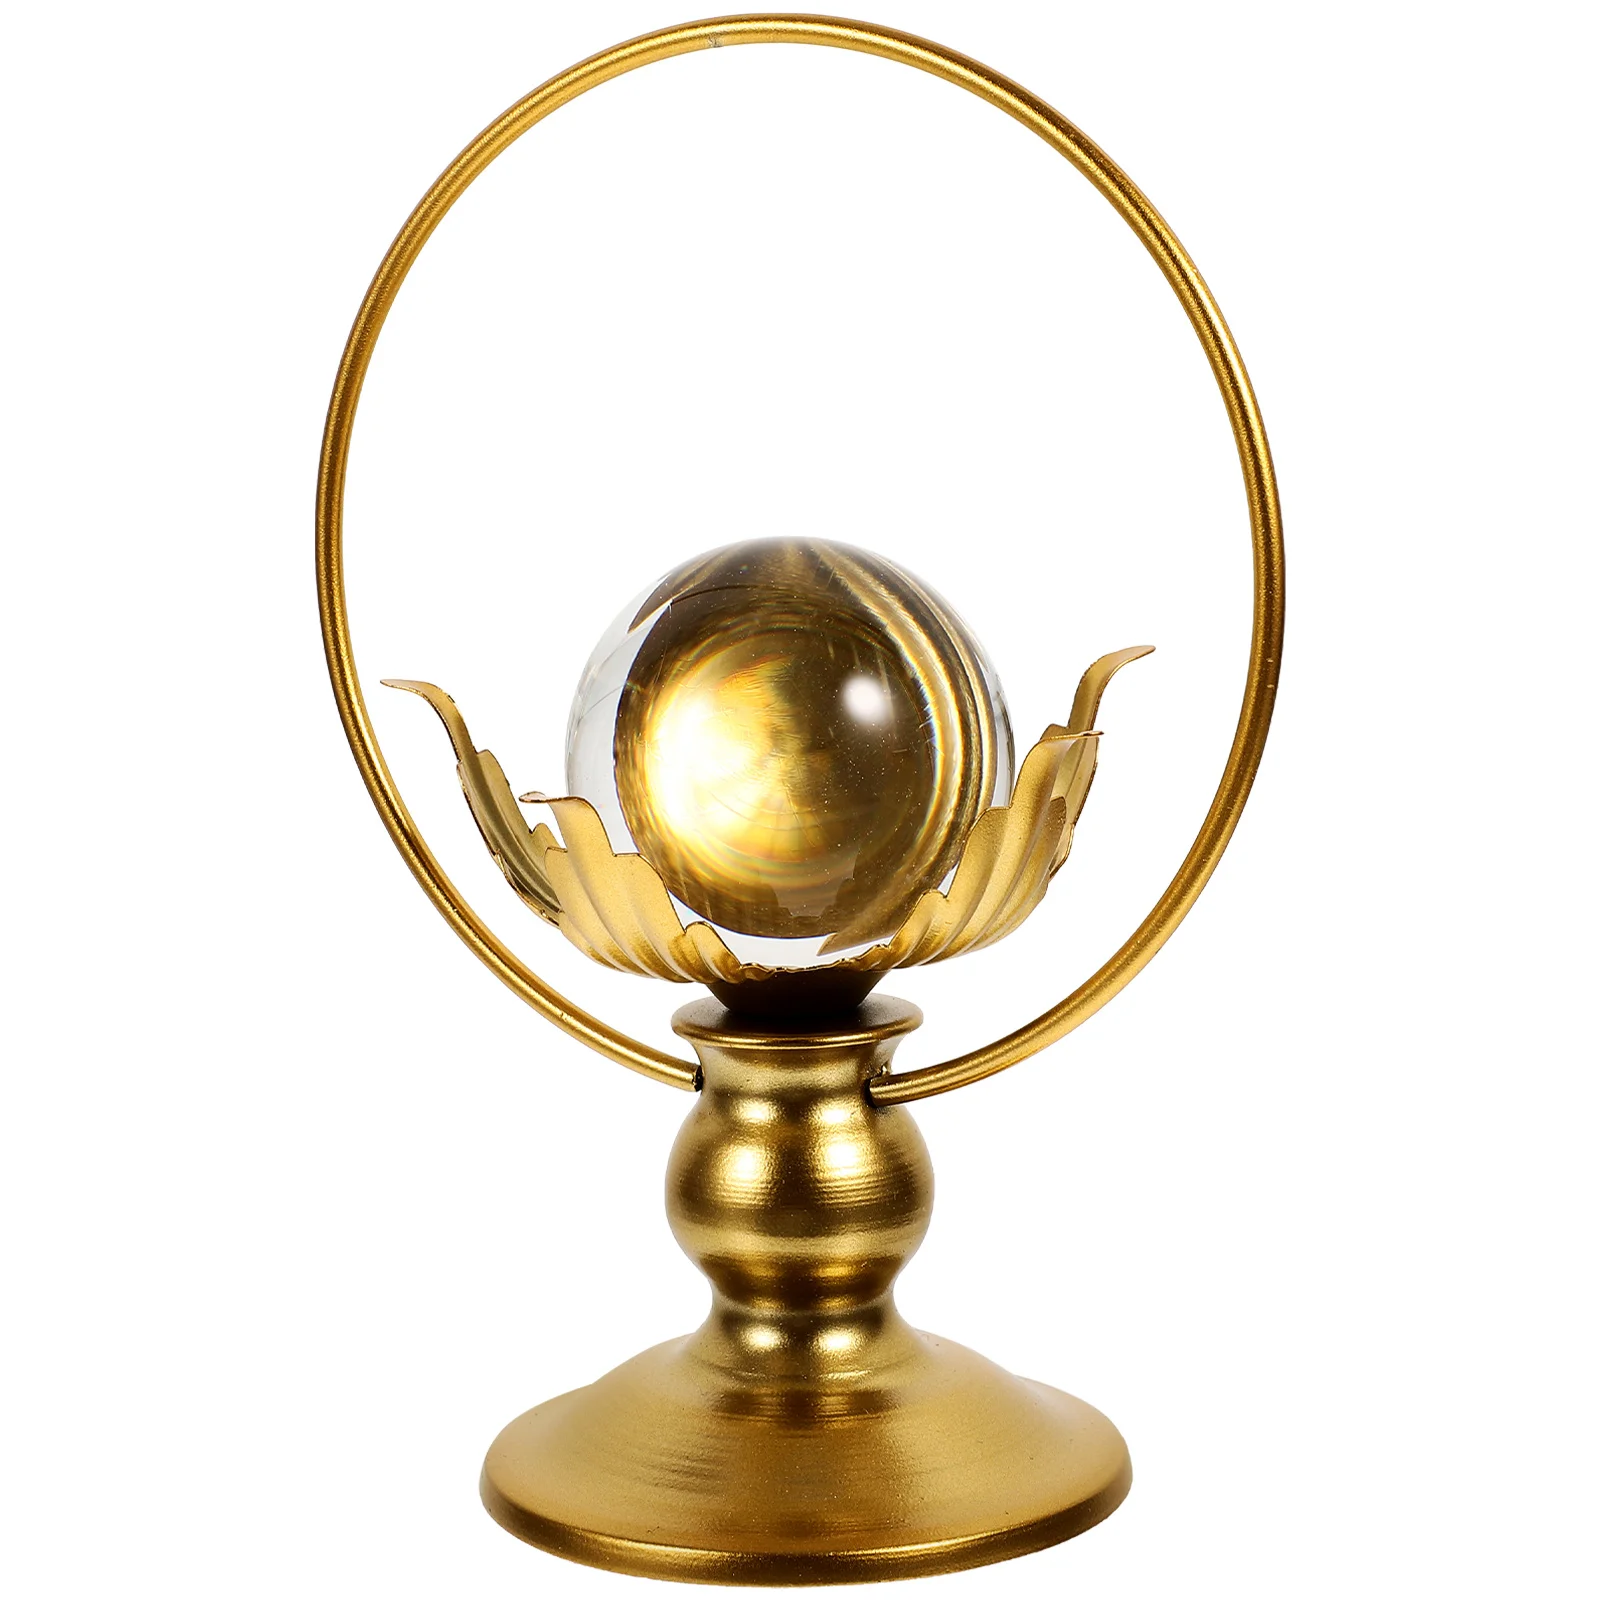 

Crystal Ball Decoration Tabletop Holder Statue Home Furnishings Desktop Delicate Ornament Cabinet Adornment Stand